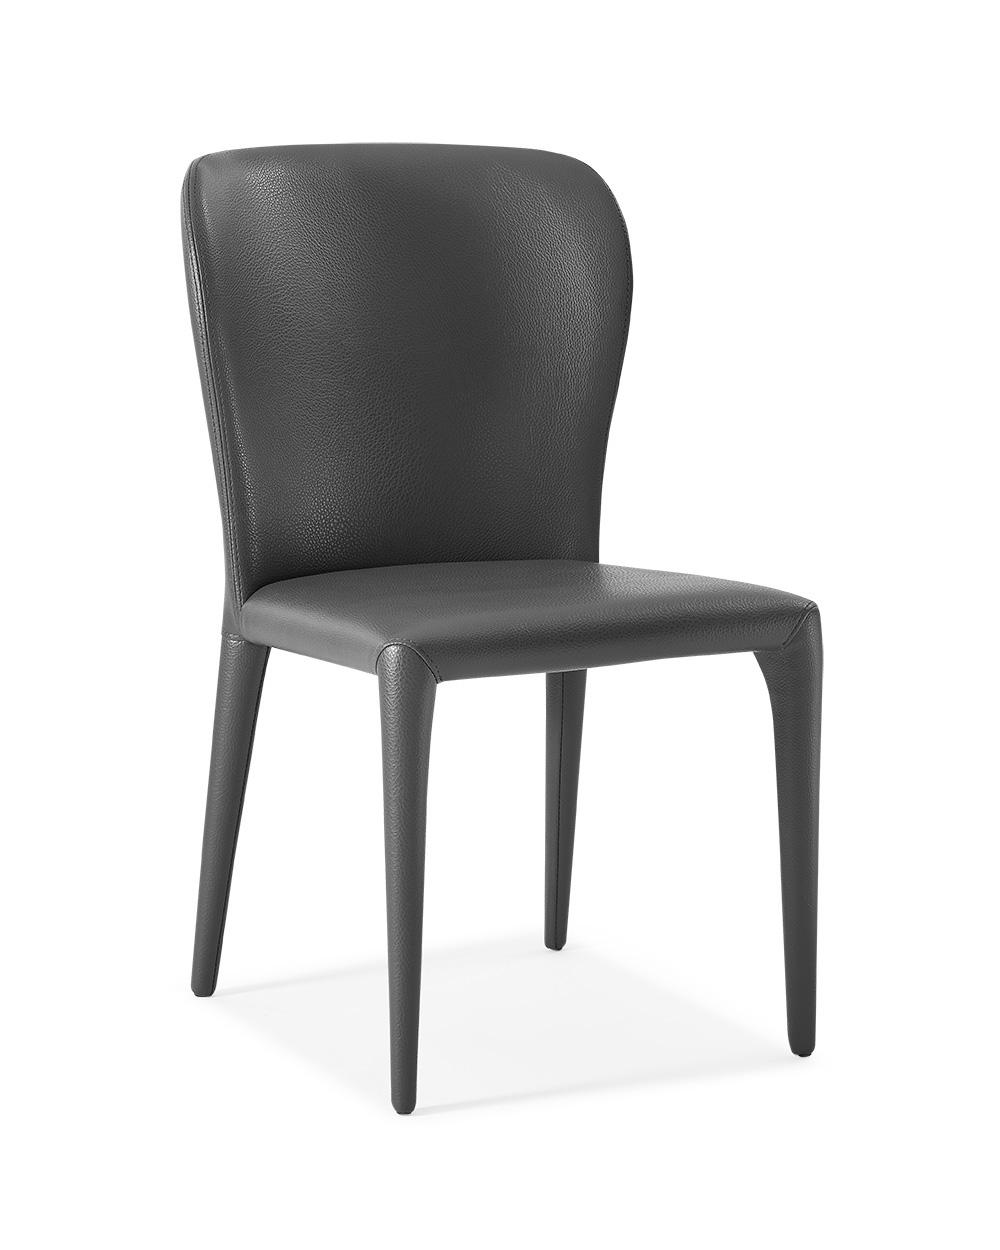 Modern Dining Chair Set DC1455-GRY Hazel DC1455-GRY in Gray Faux Leather